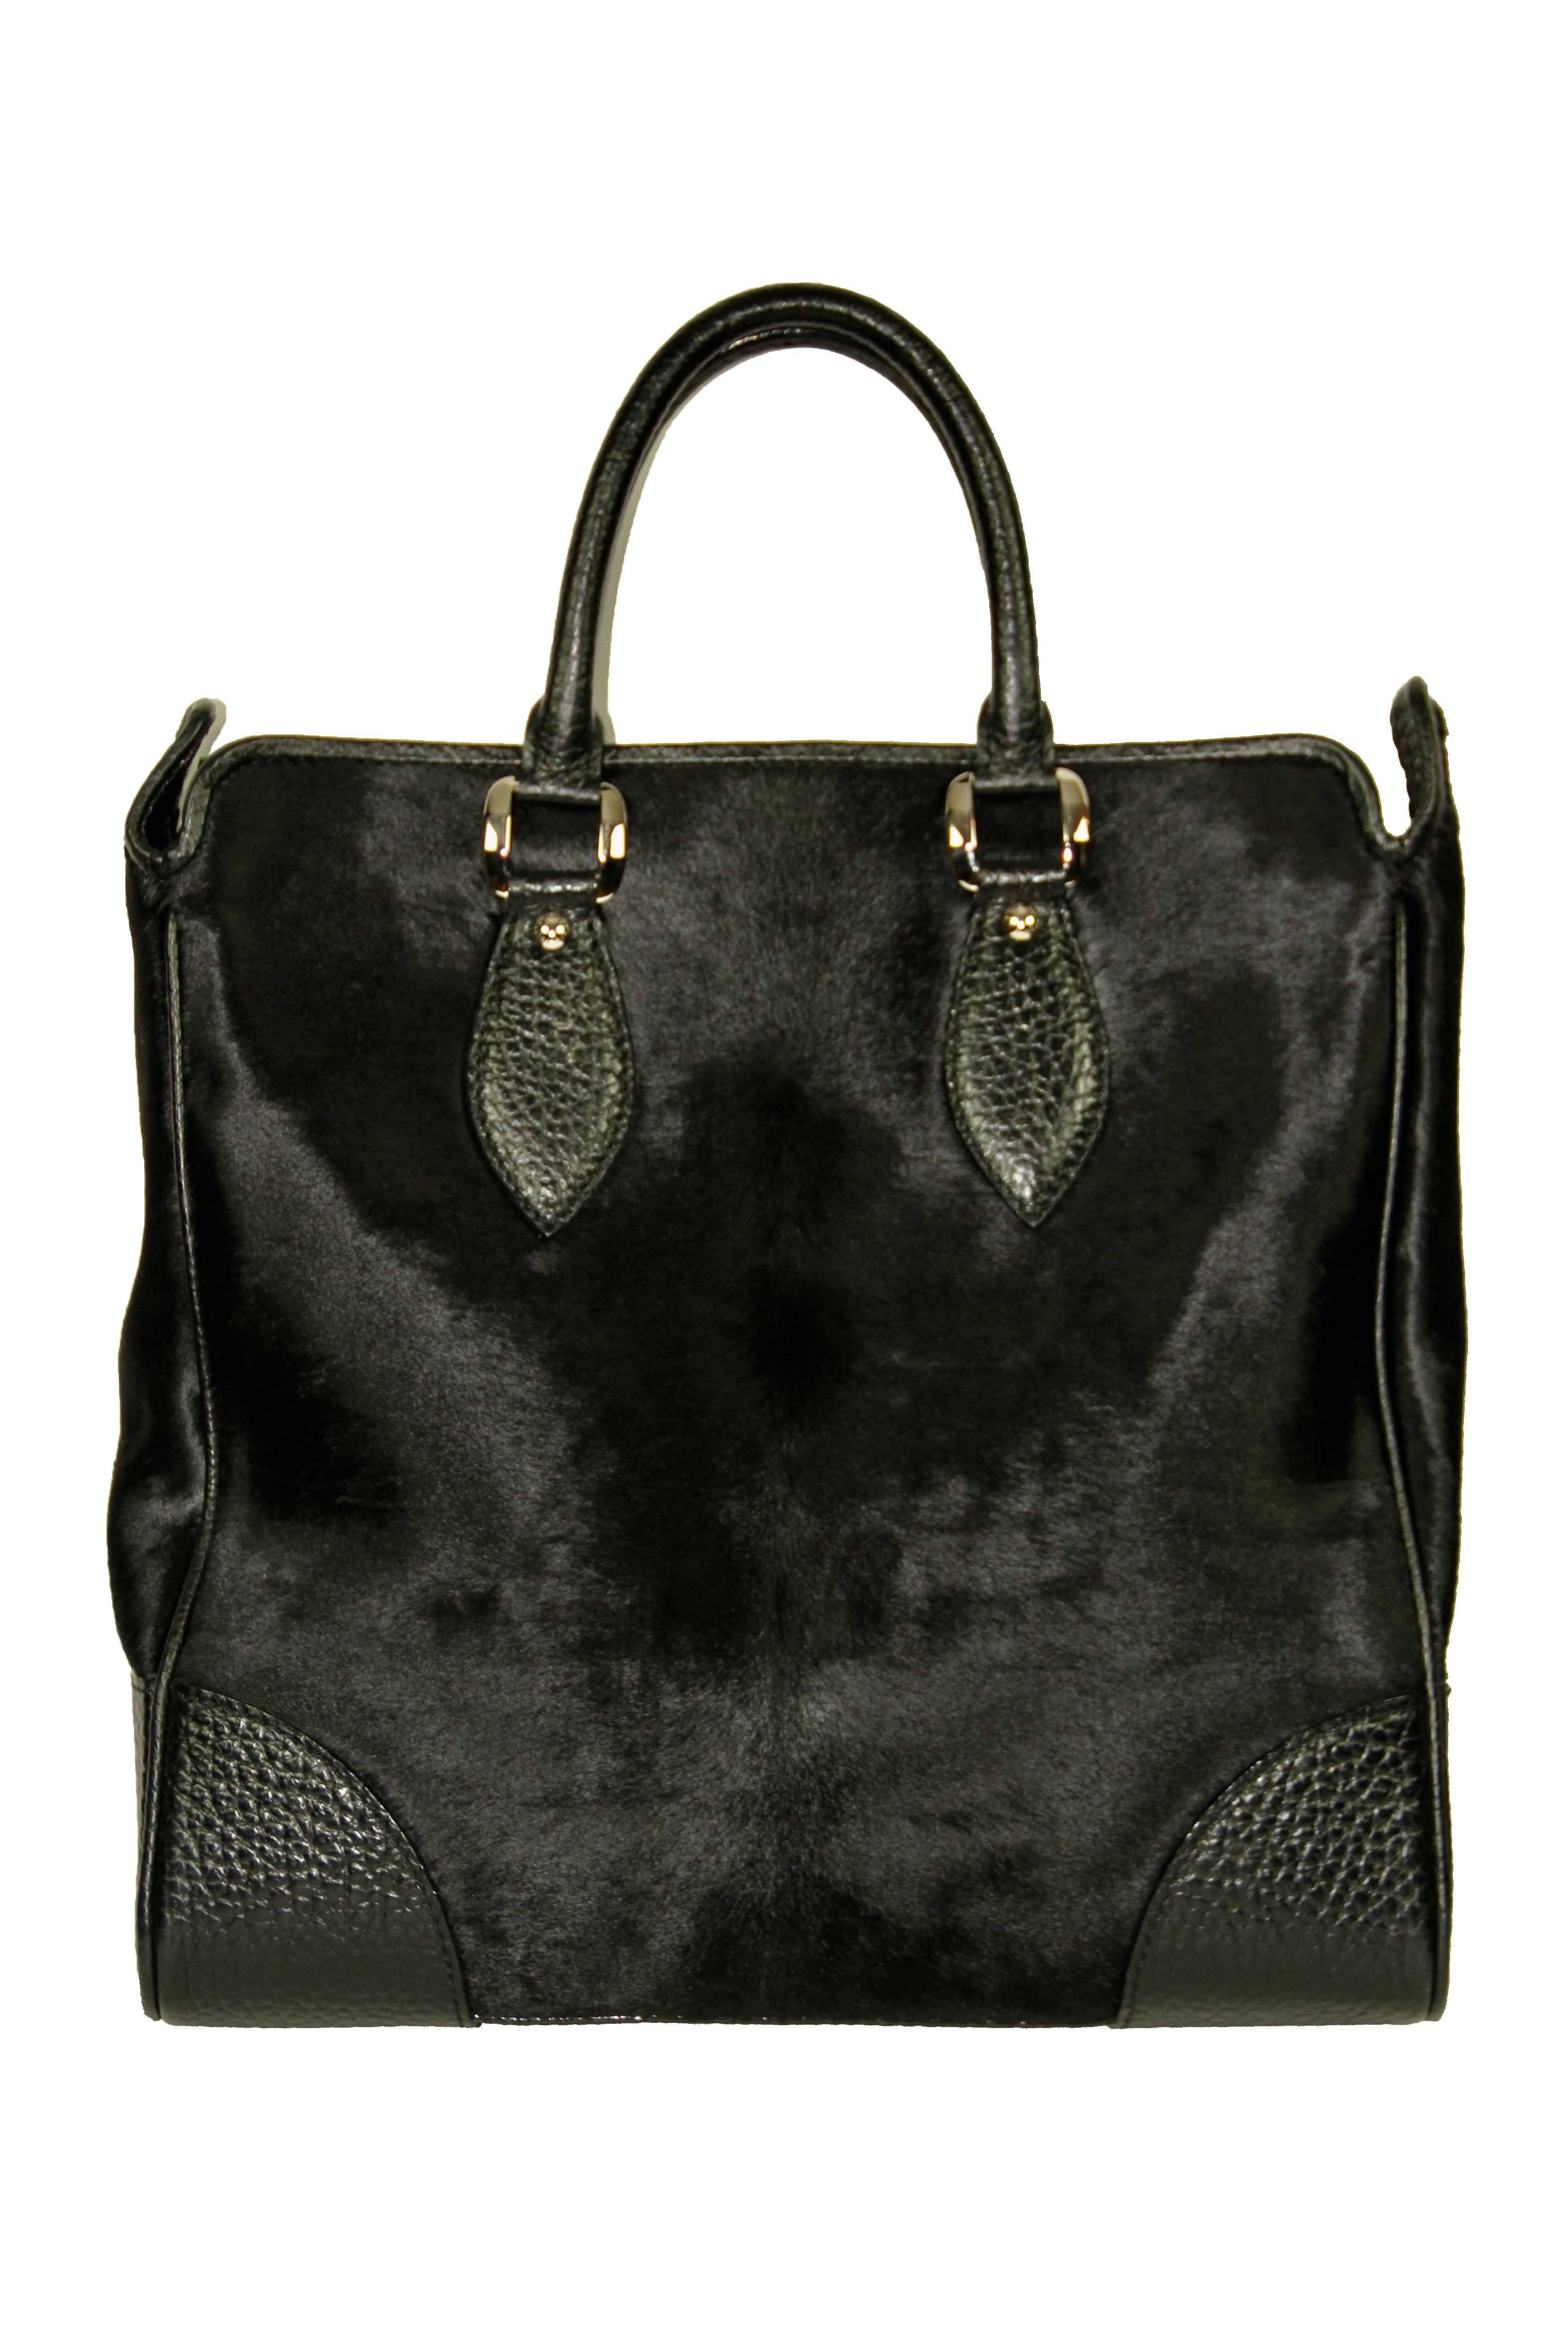 Amazing and structured tote bag from listed edition 2006 men runway collection. It is made of Naxos leather and spawn fur.   

Year: 2006 
Material: Grained leather, pony hair 
Color: Black 
Hardware: Polished silvertone 
Measurements: L 55 cm x H